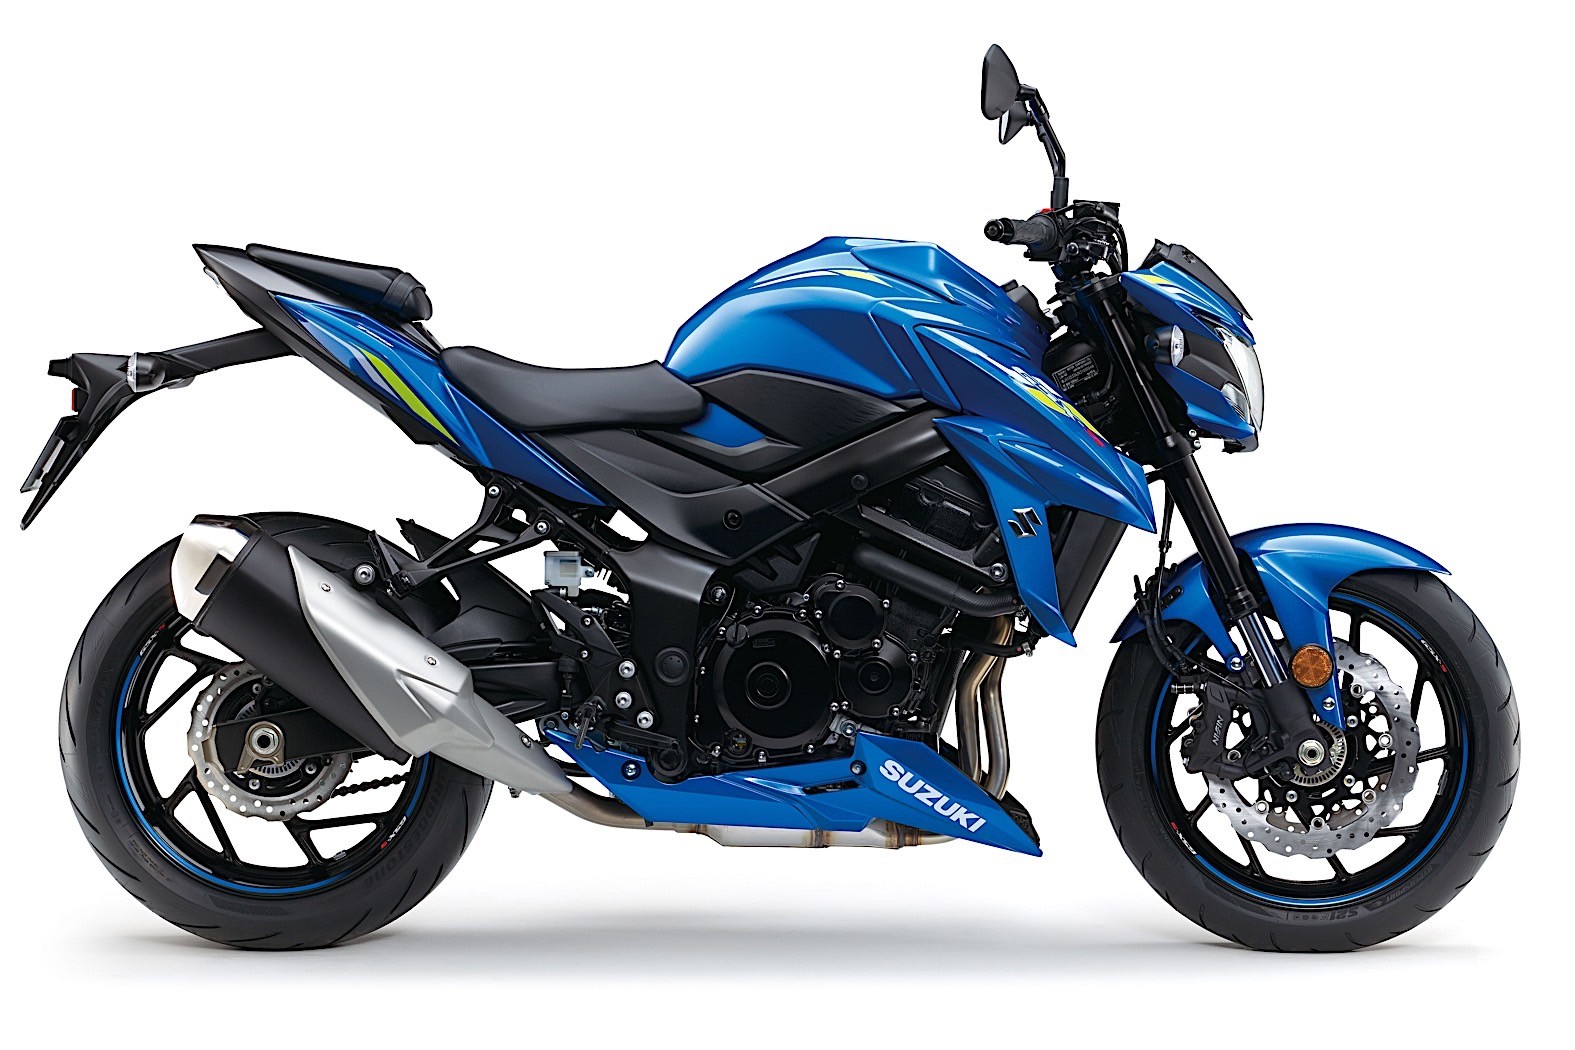 Buying A New Motorcycle : 2019 Suzuki Motorcycles Shine in New Colors ...